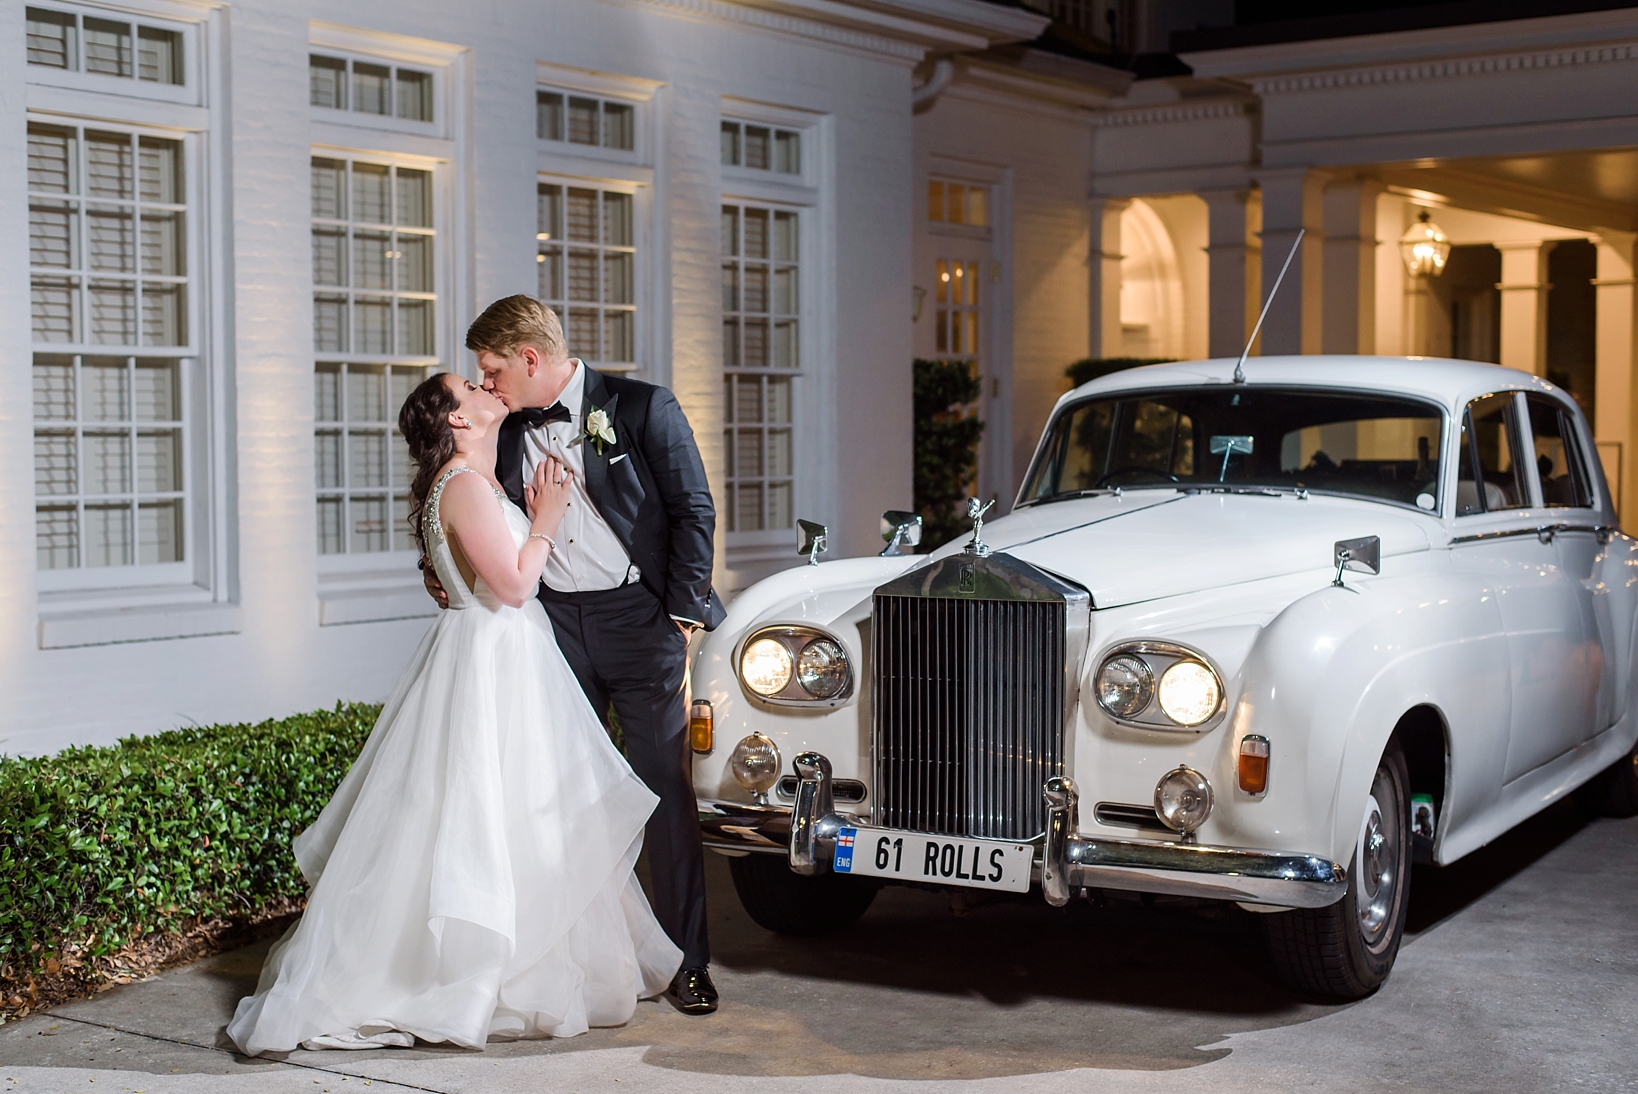 1961 Rolls Royce and the Bride and Groom kissing by Sarah & Ben Photography